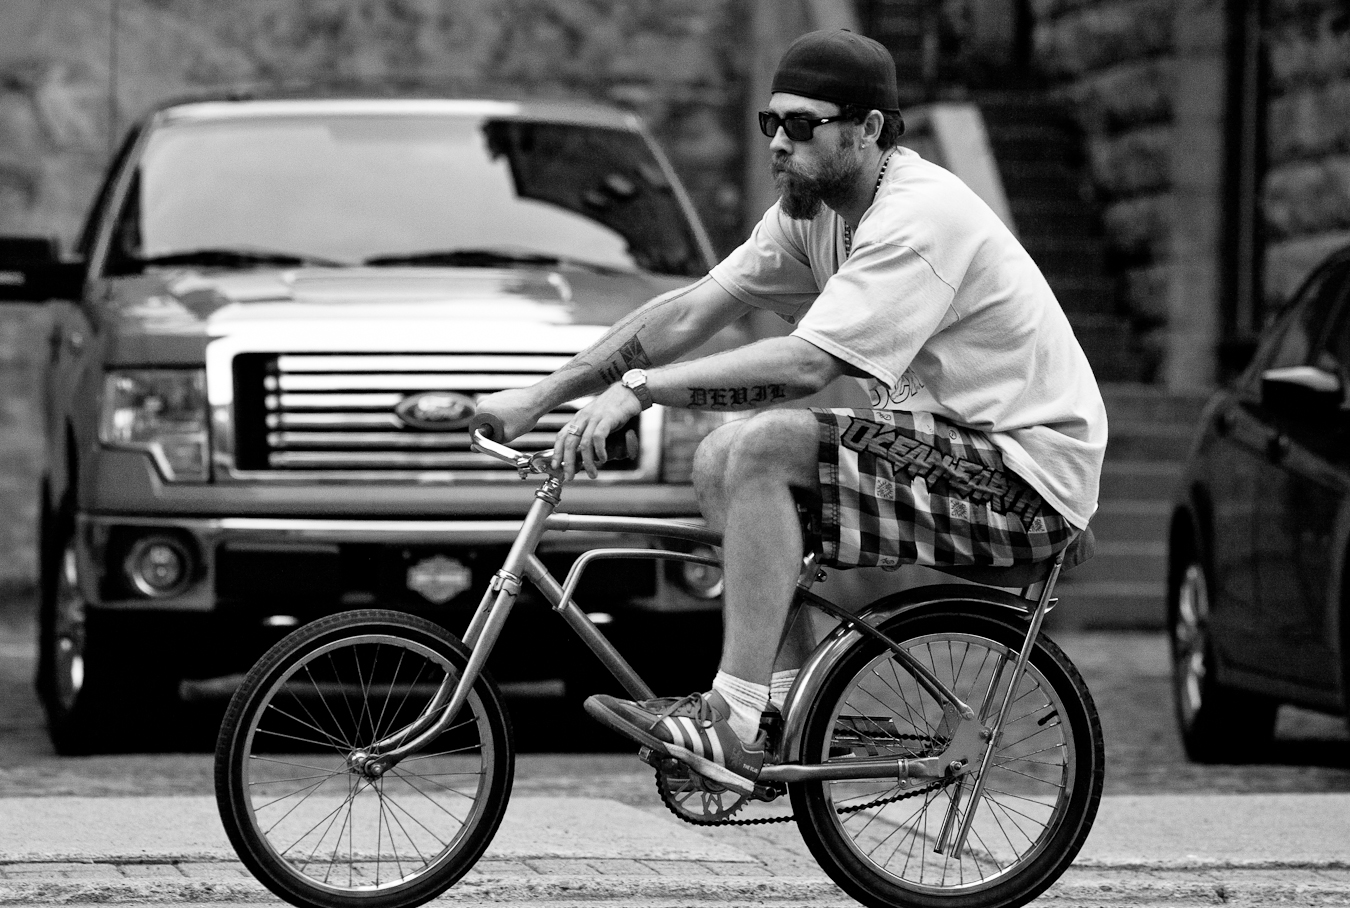 Gentleman cycles his Lowrider shot by D.Edwards